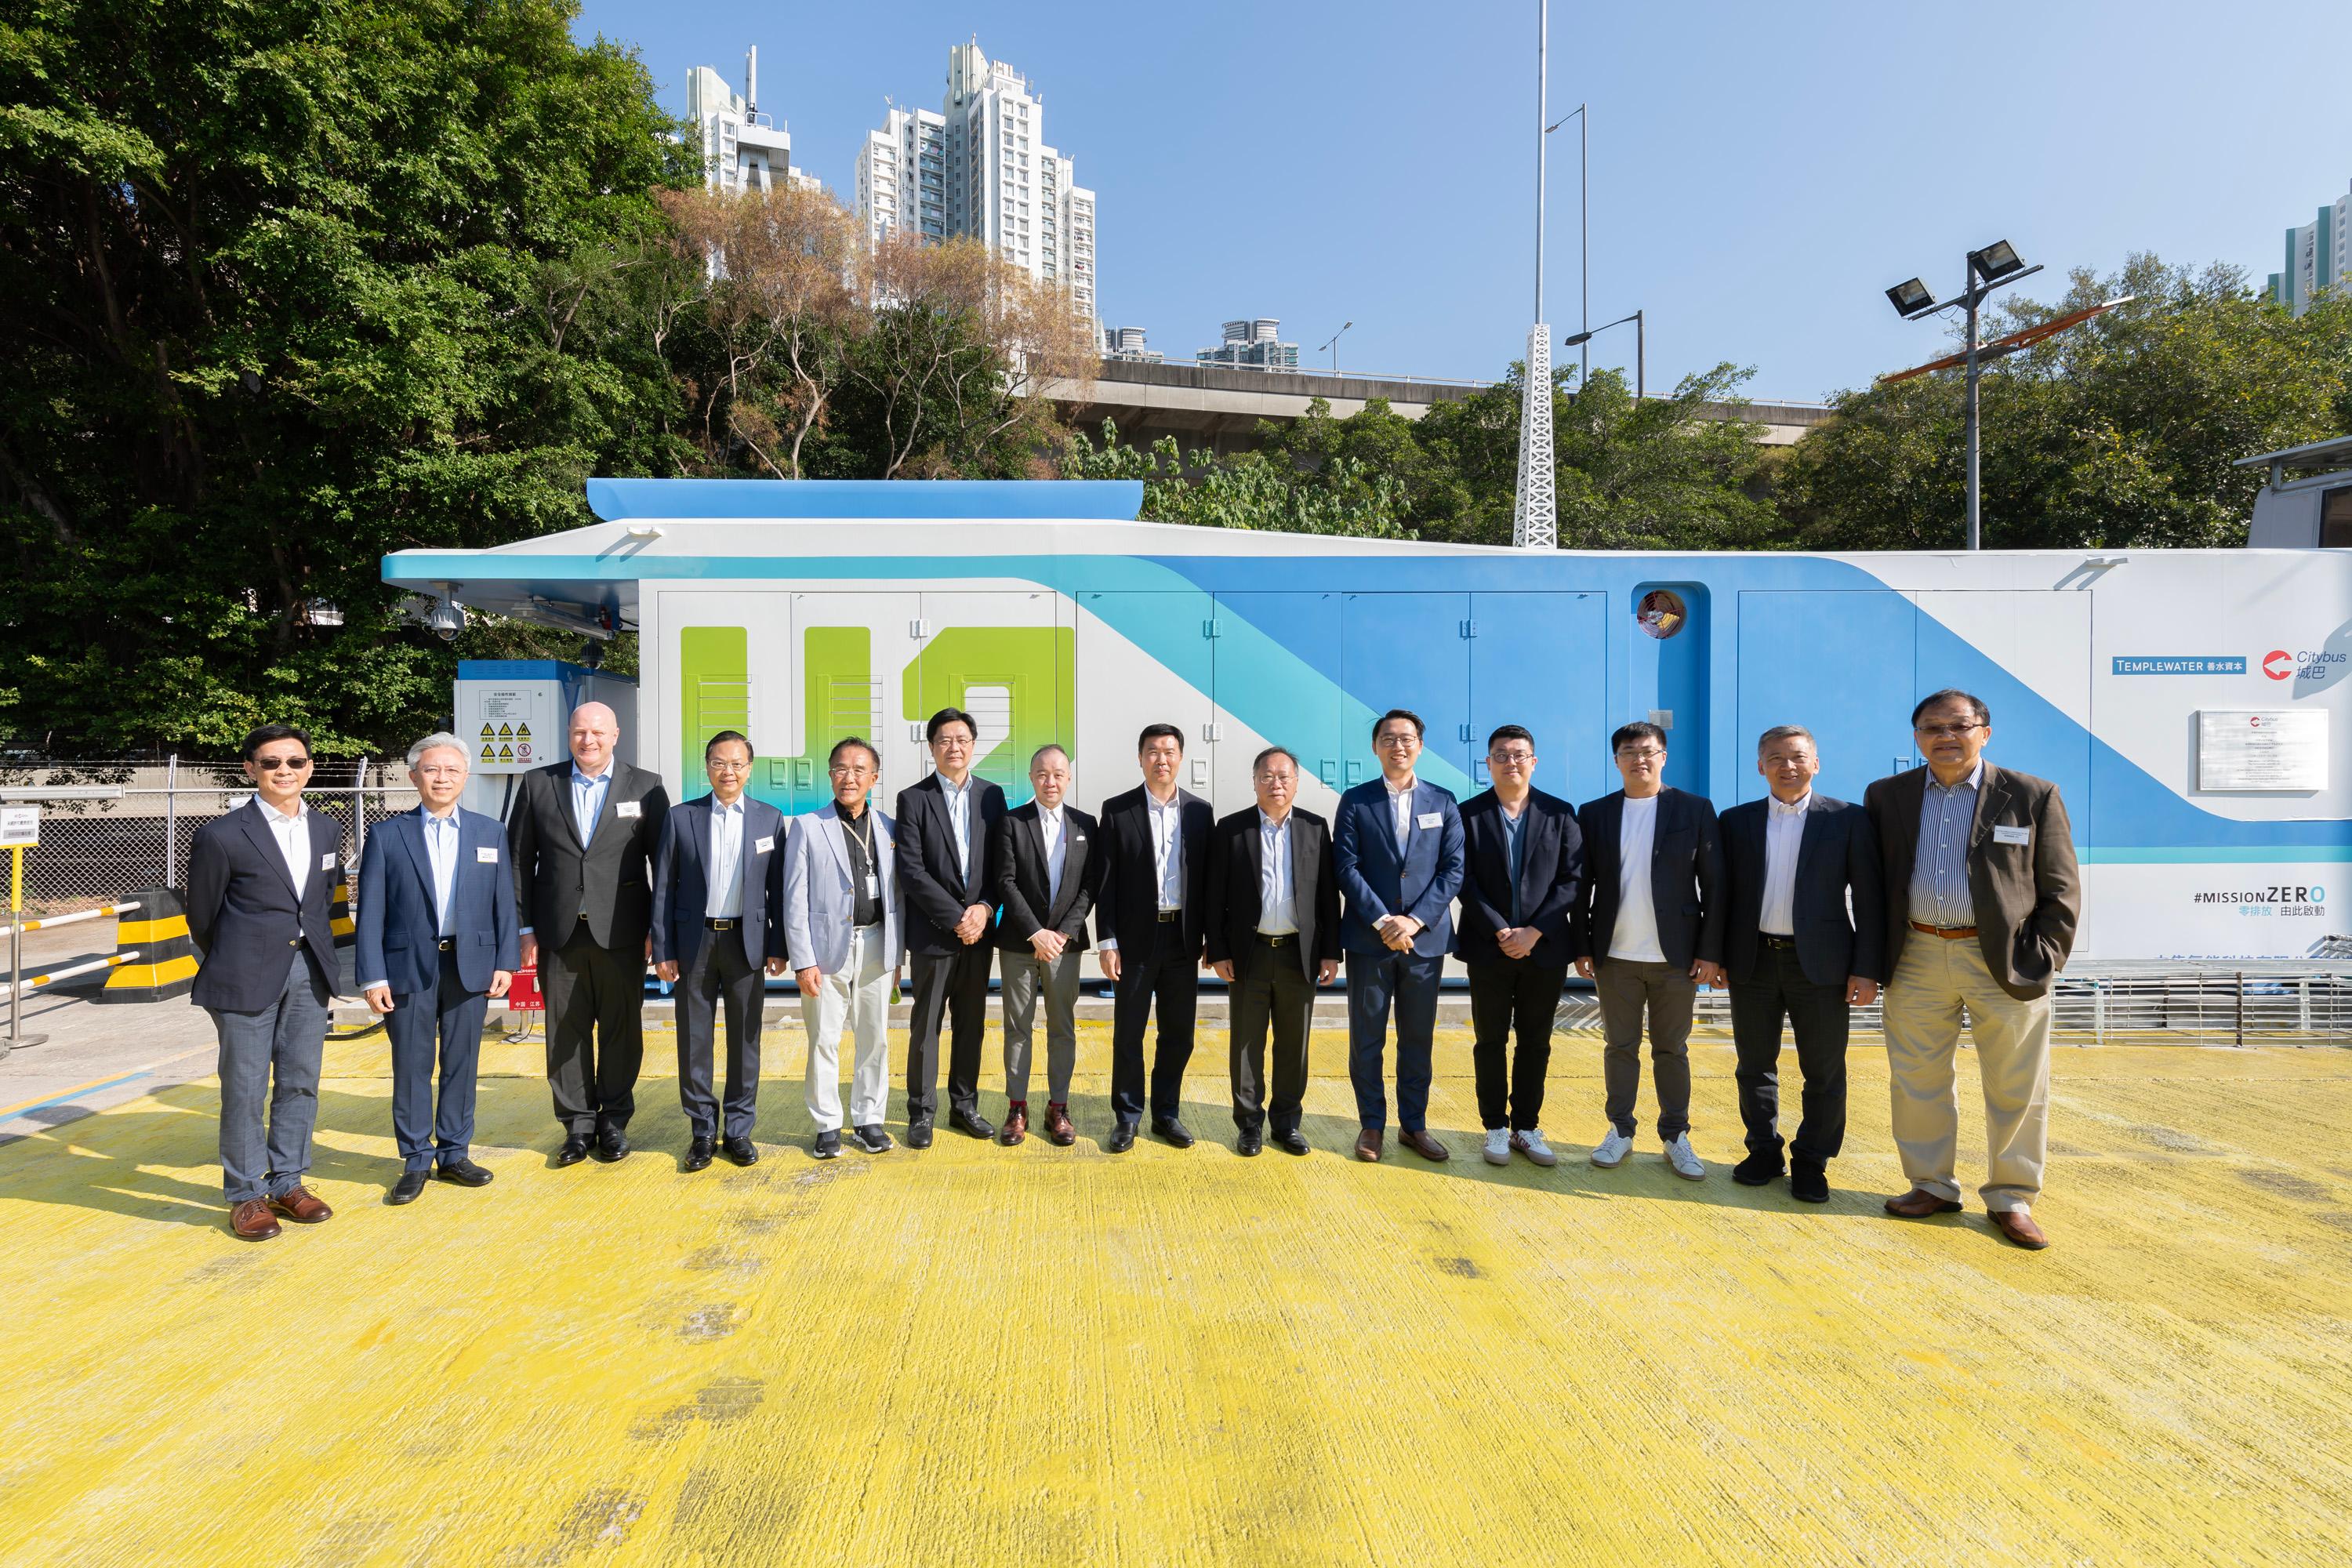 The Legislative Council Panel on Environmental Affairs and Panel on Transport conducted a joint visit to the Citybus Hydrogen Refuelling Station and its hydrogen bus today (December 12). Photo shows Members and the Citybus management posing for a group photo in front of the hydrogen refuelling station in Citybus West Kowloon Depot.